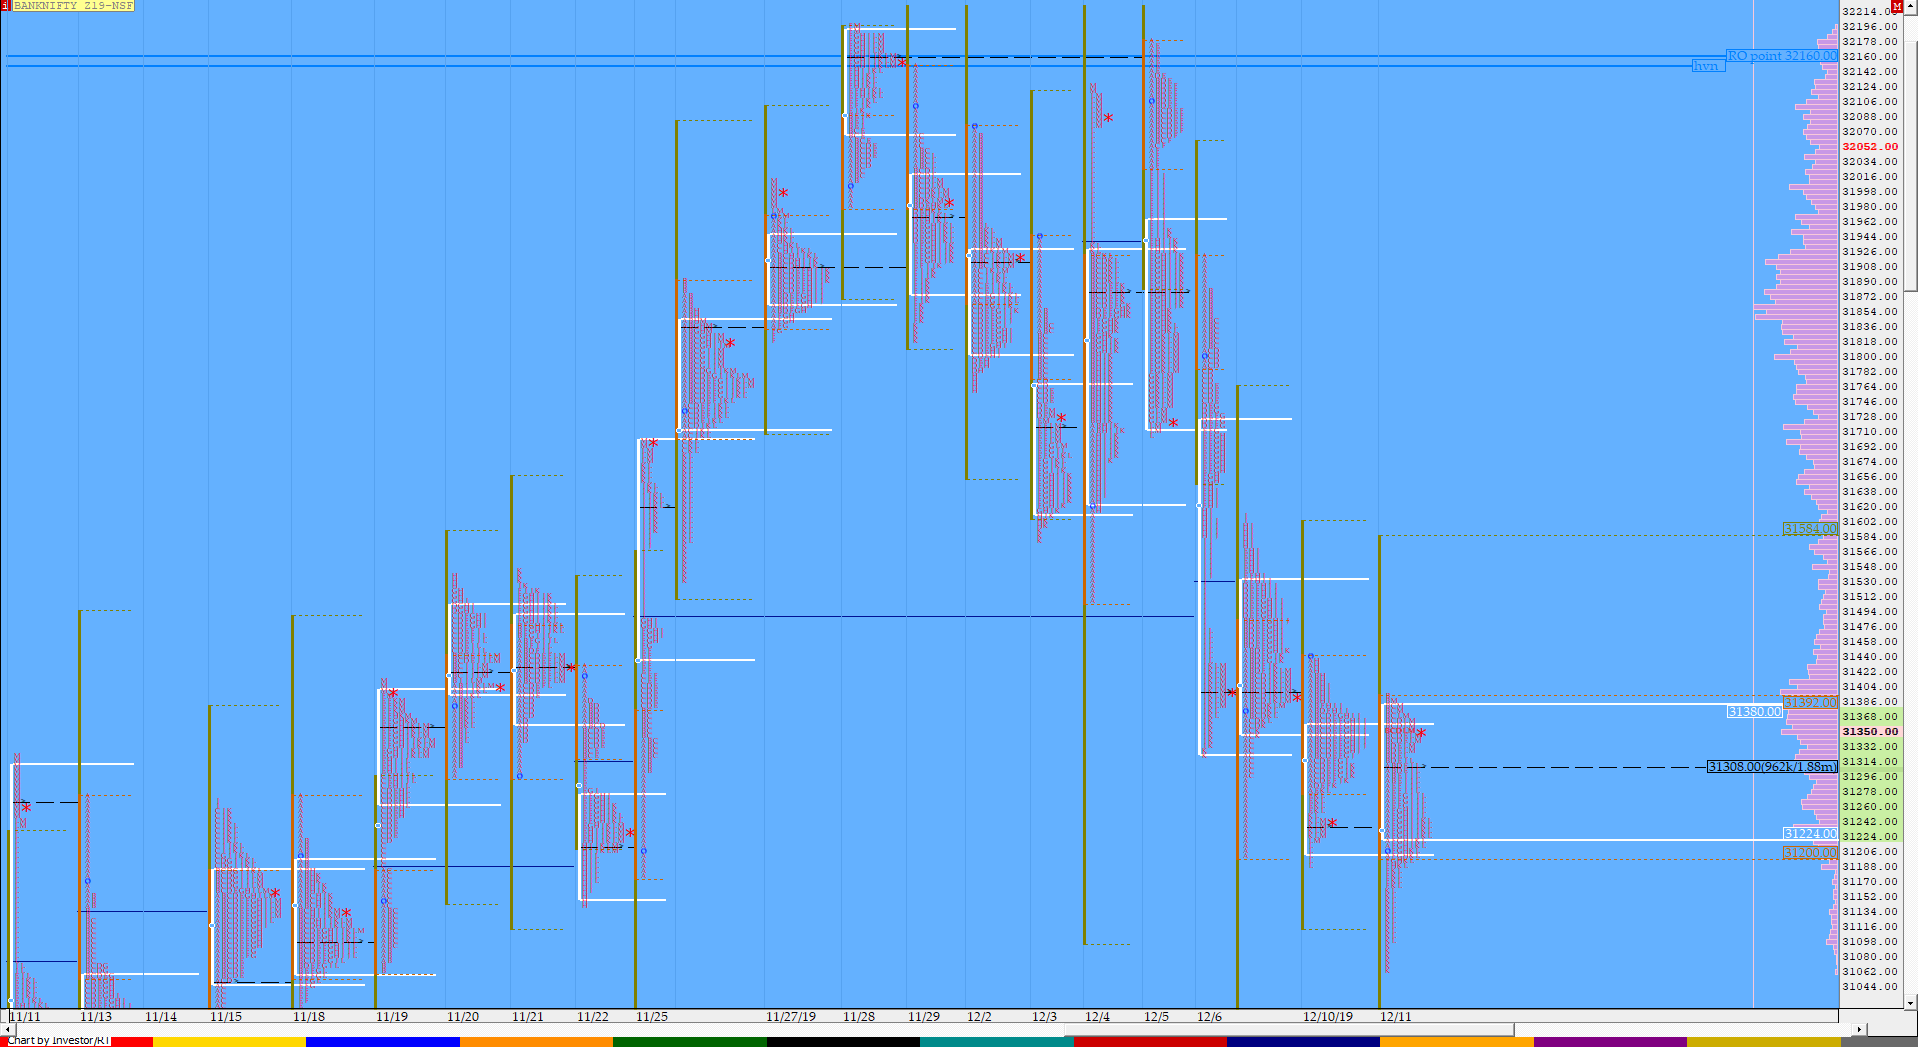 Bnf Compo1 8 Market Profile Analysis Dated 11Th December Banknifty Futures, Charts, Day Trading, Intraday Trading, Intraday Trading Strategies, Market Profile, Market Profile Trading Strategies, Nifty Futures, Order Flow Analysis, Support And Resistance, Technical Analysis, Trading Strategies, Volume Profile Trading